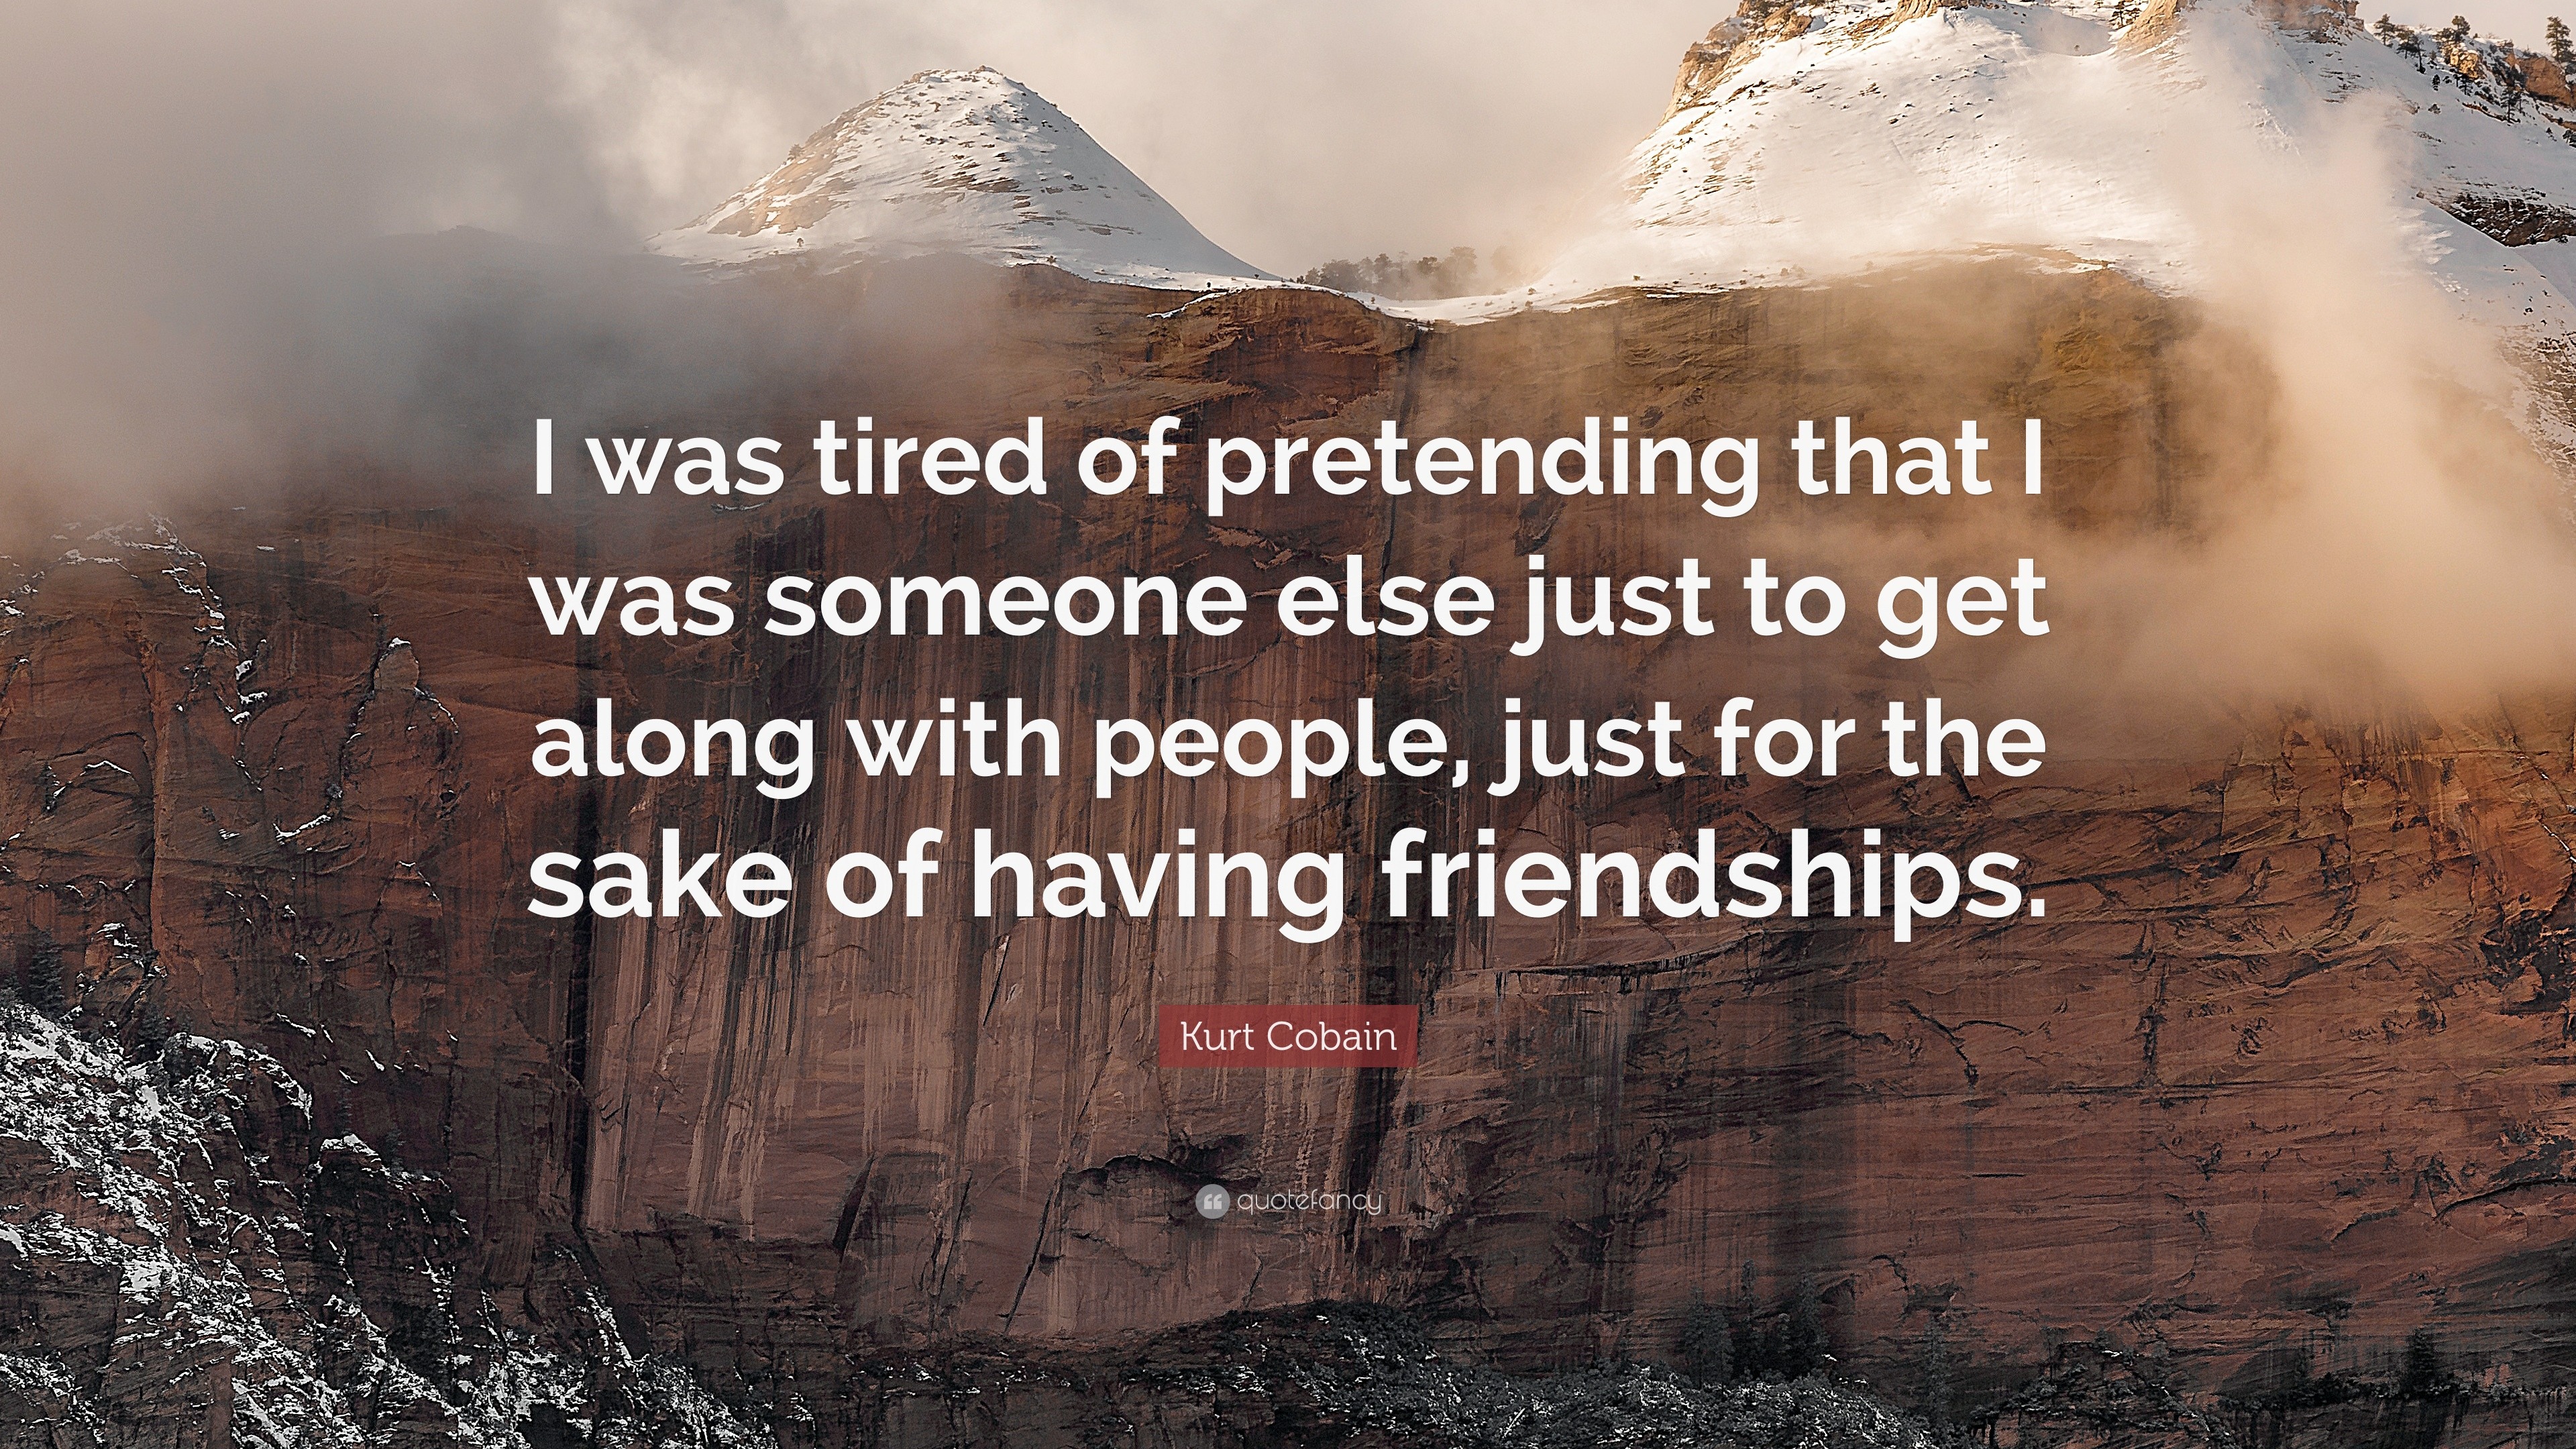 Kurt Cobain Quote “I was tired of pretending that I was someone else just